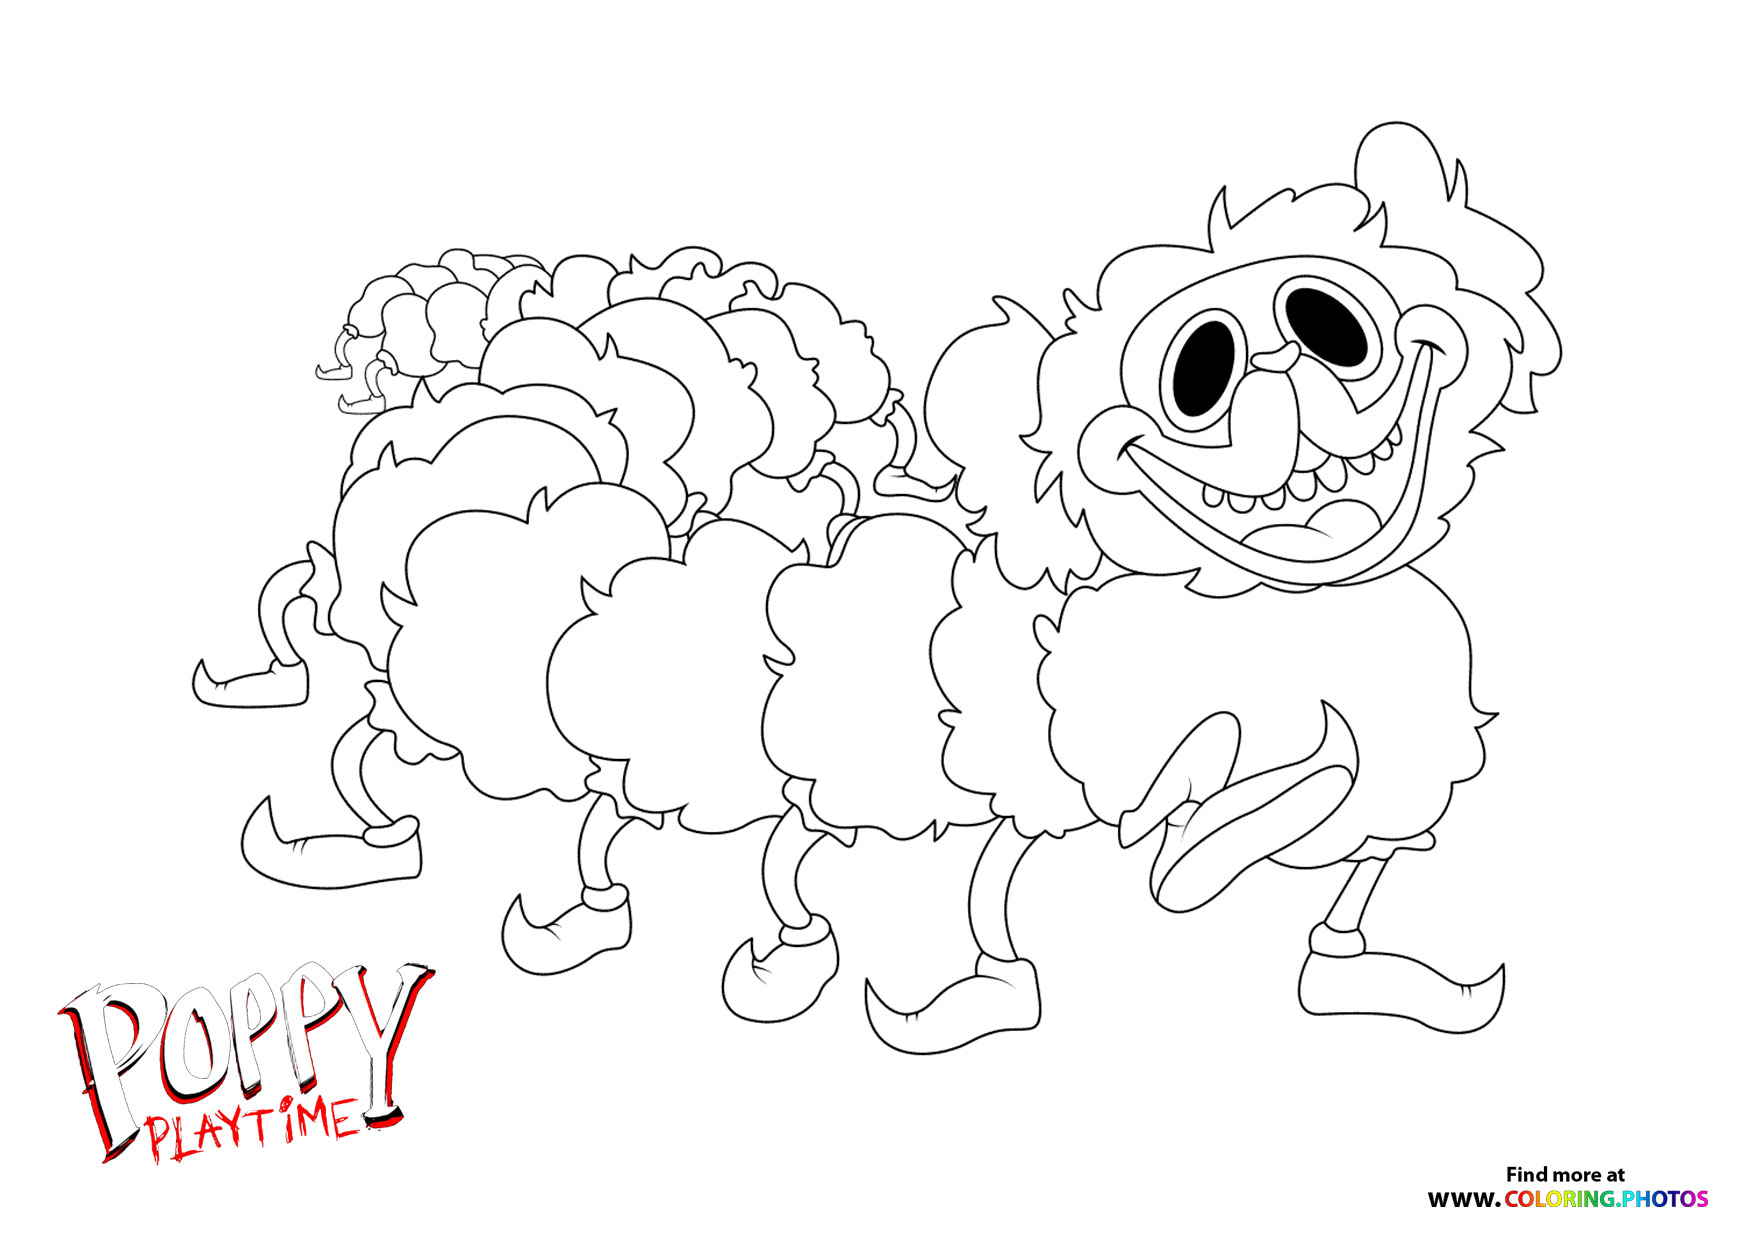 Games Page 9 of 10 Coloring Pages for kids Free and easy print or